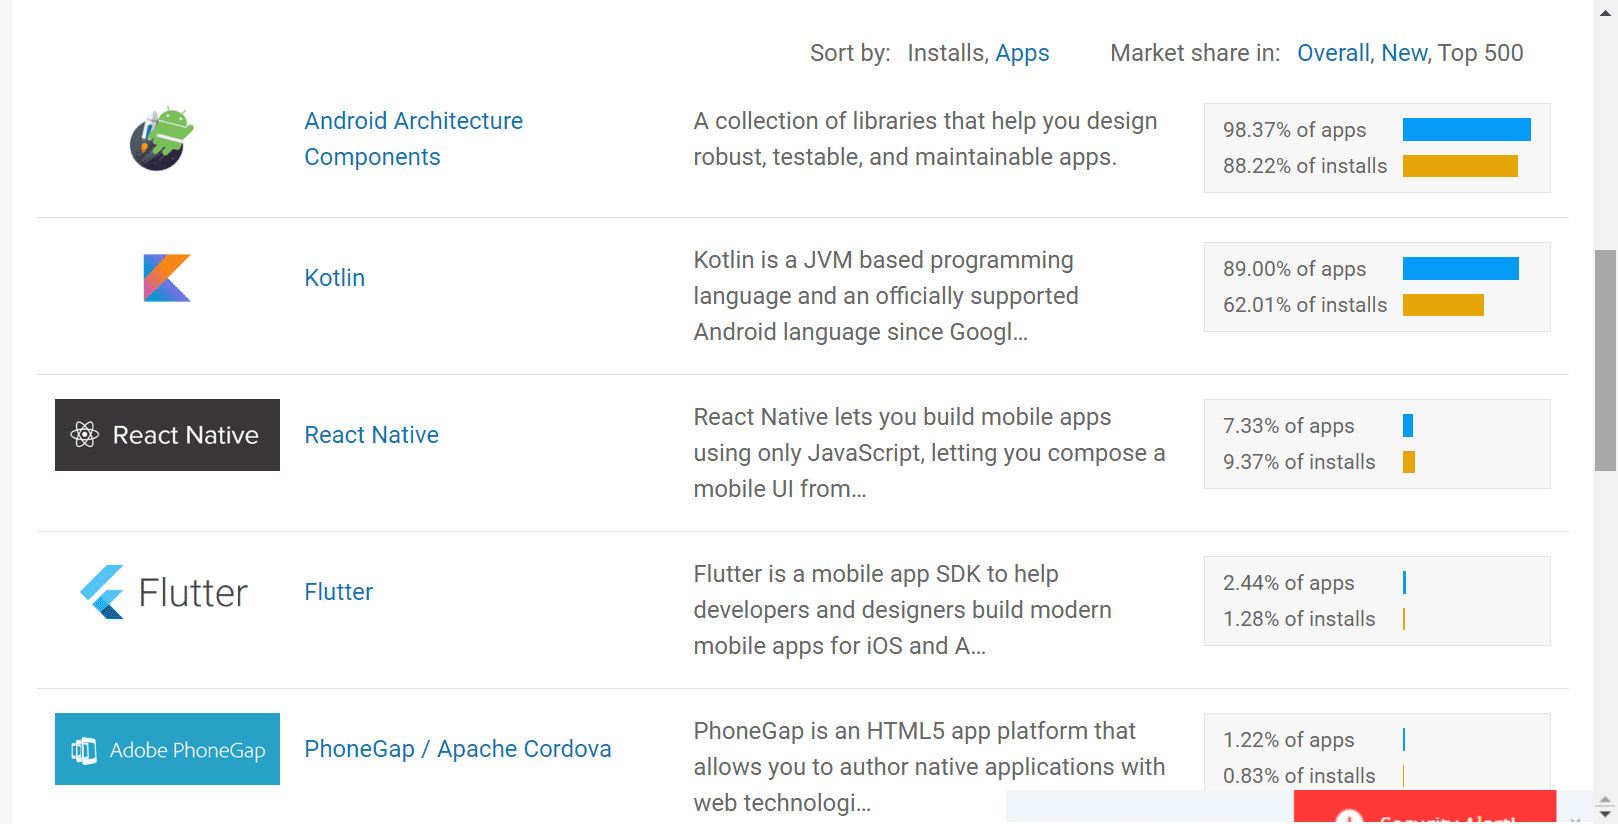 According to which React Native is the third most popular framework, behind Kotlin and Android Architectural Components.